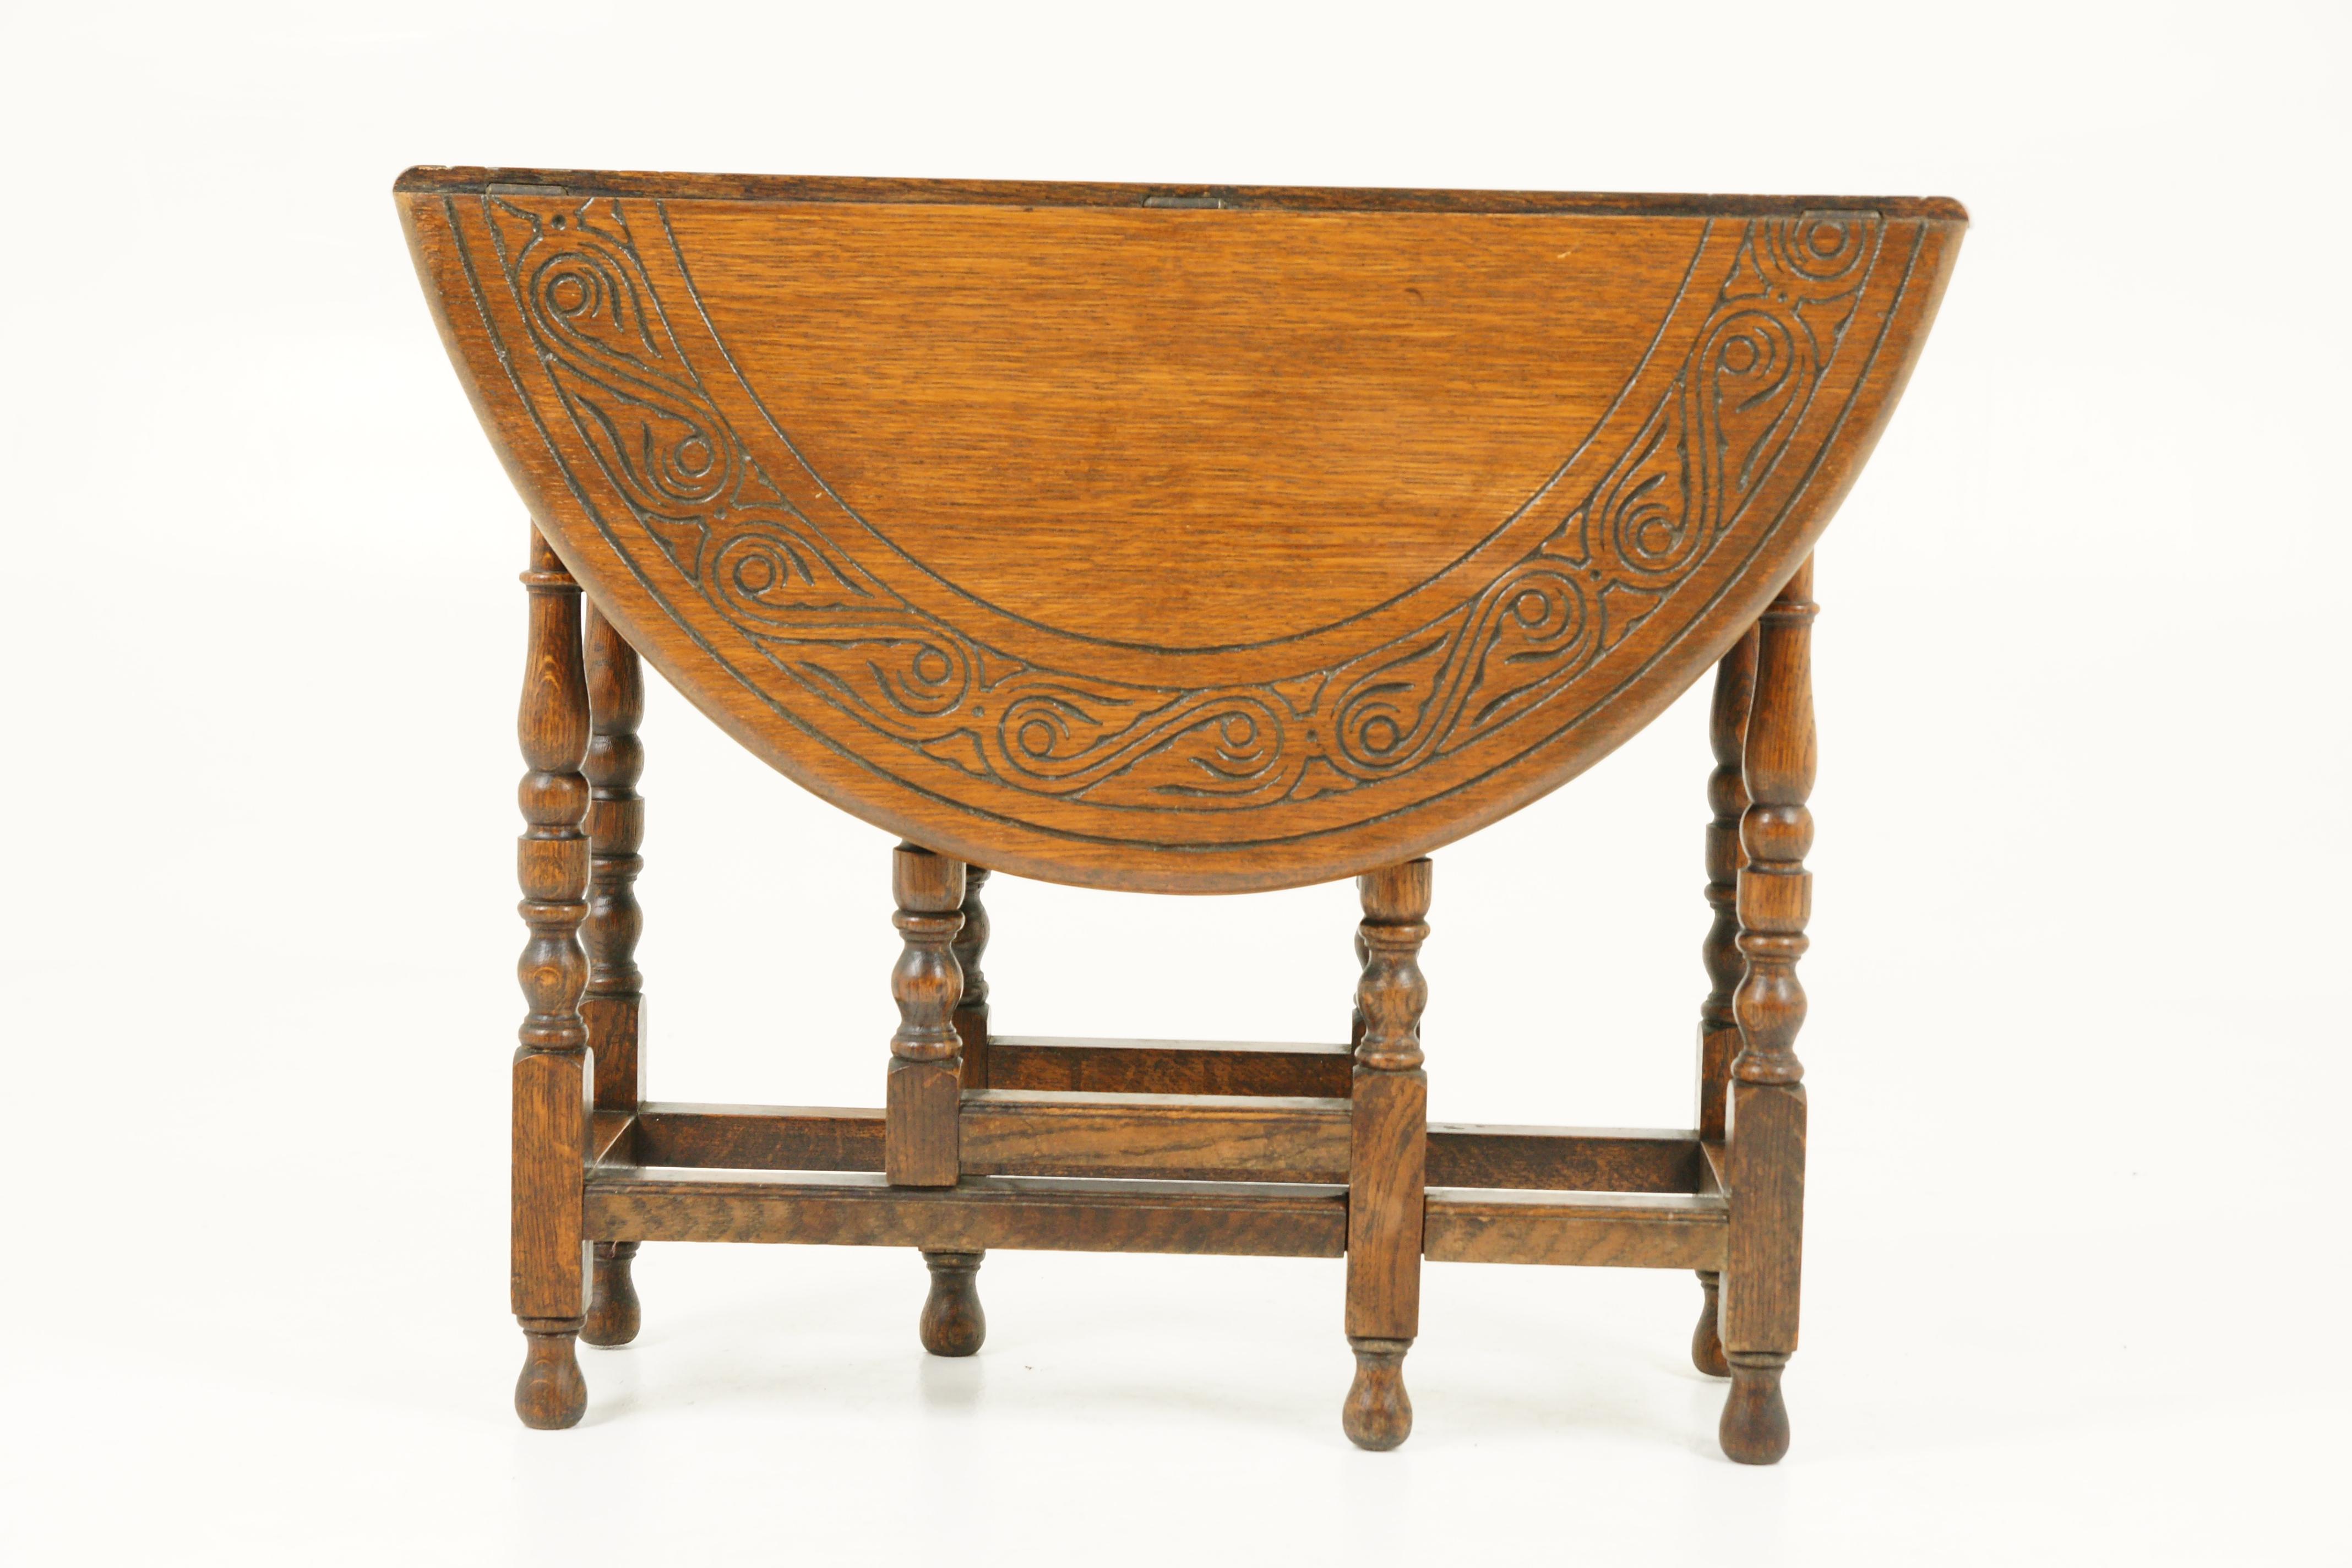 Antique gateleg table, carved drop leaf table, antique furniture, Scotland 1930, B1717

Scotland, 1930
Solid oak construction
original finish
rectangular top when closed
carved edge around the top and the two leaves
pair of leaves open to the sides